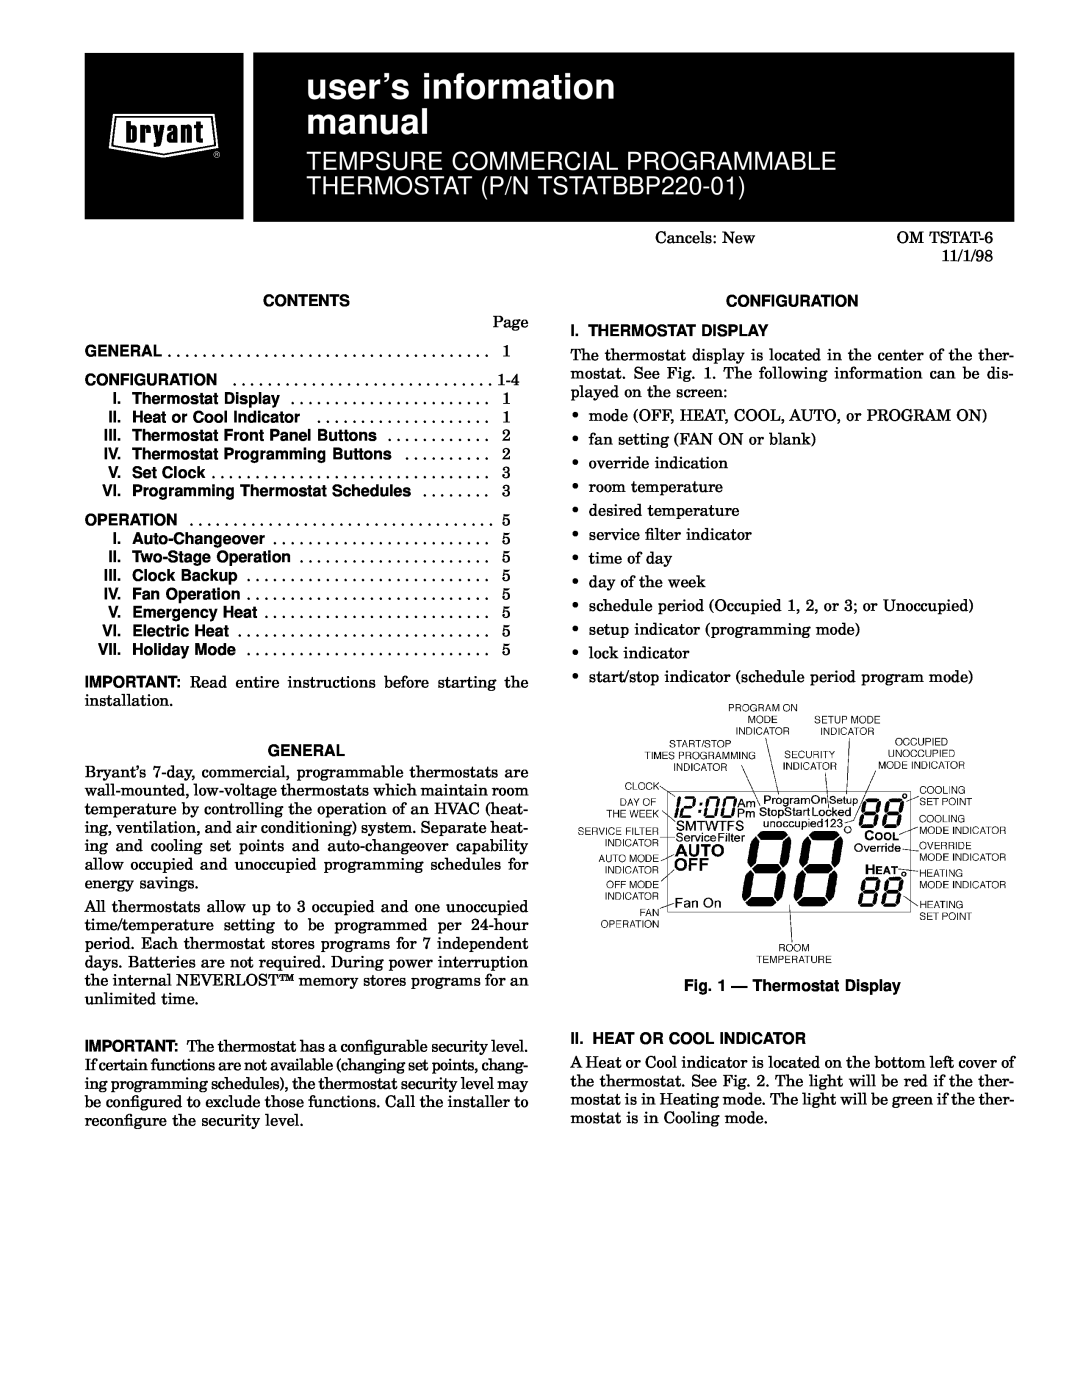 Bryant P/N TSTATBBP220-01 manual Contents, General, Configuration I. Thermostat Display, users information manual 